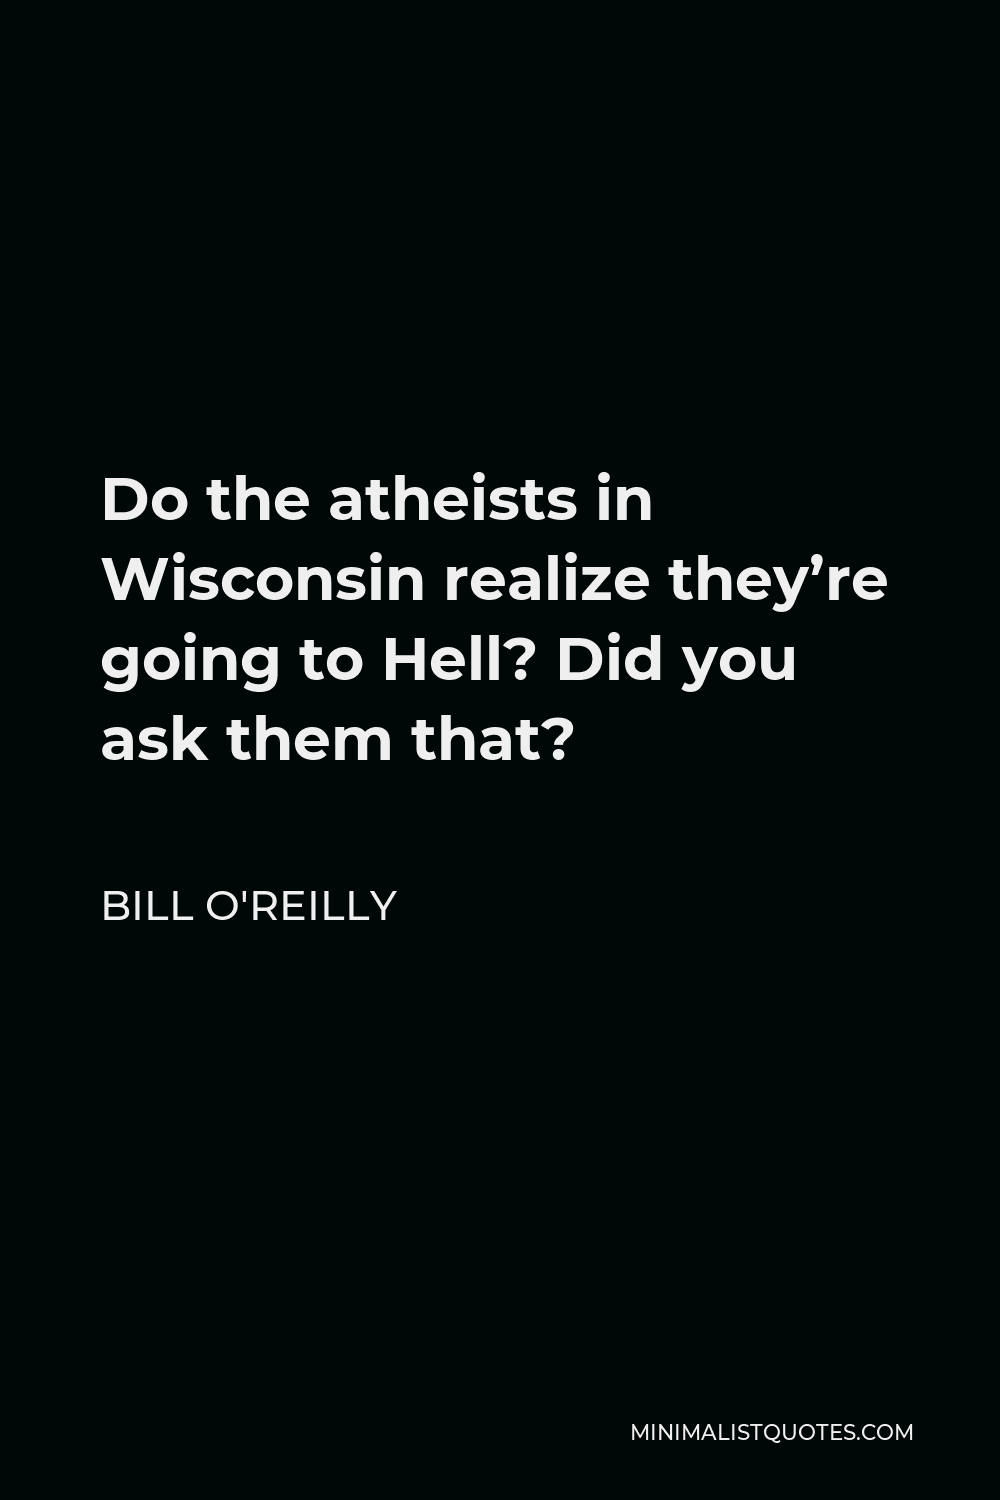 Bill O'Reilly Quote - Do the atheists in Wisconsin realize they’re going to Hell? Did you ask them that?